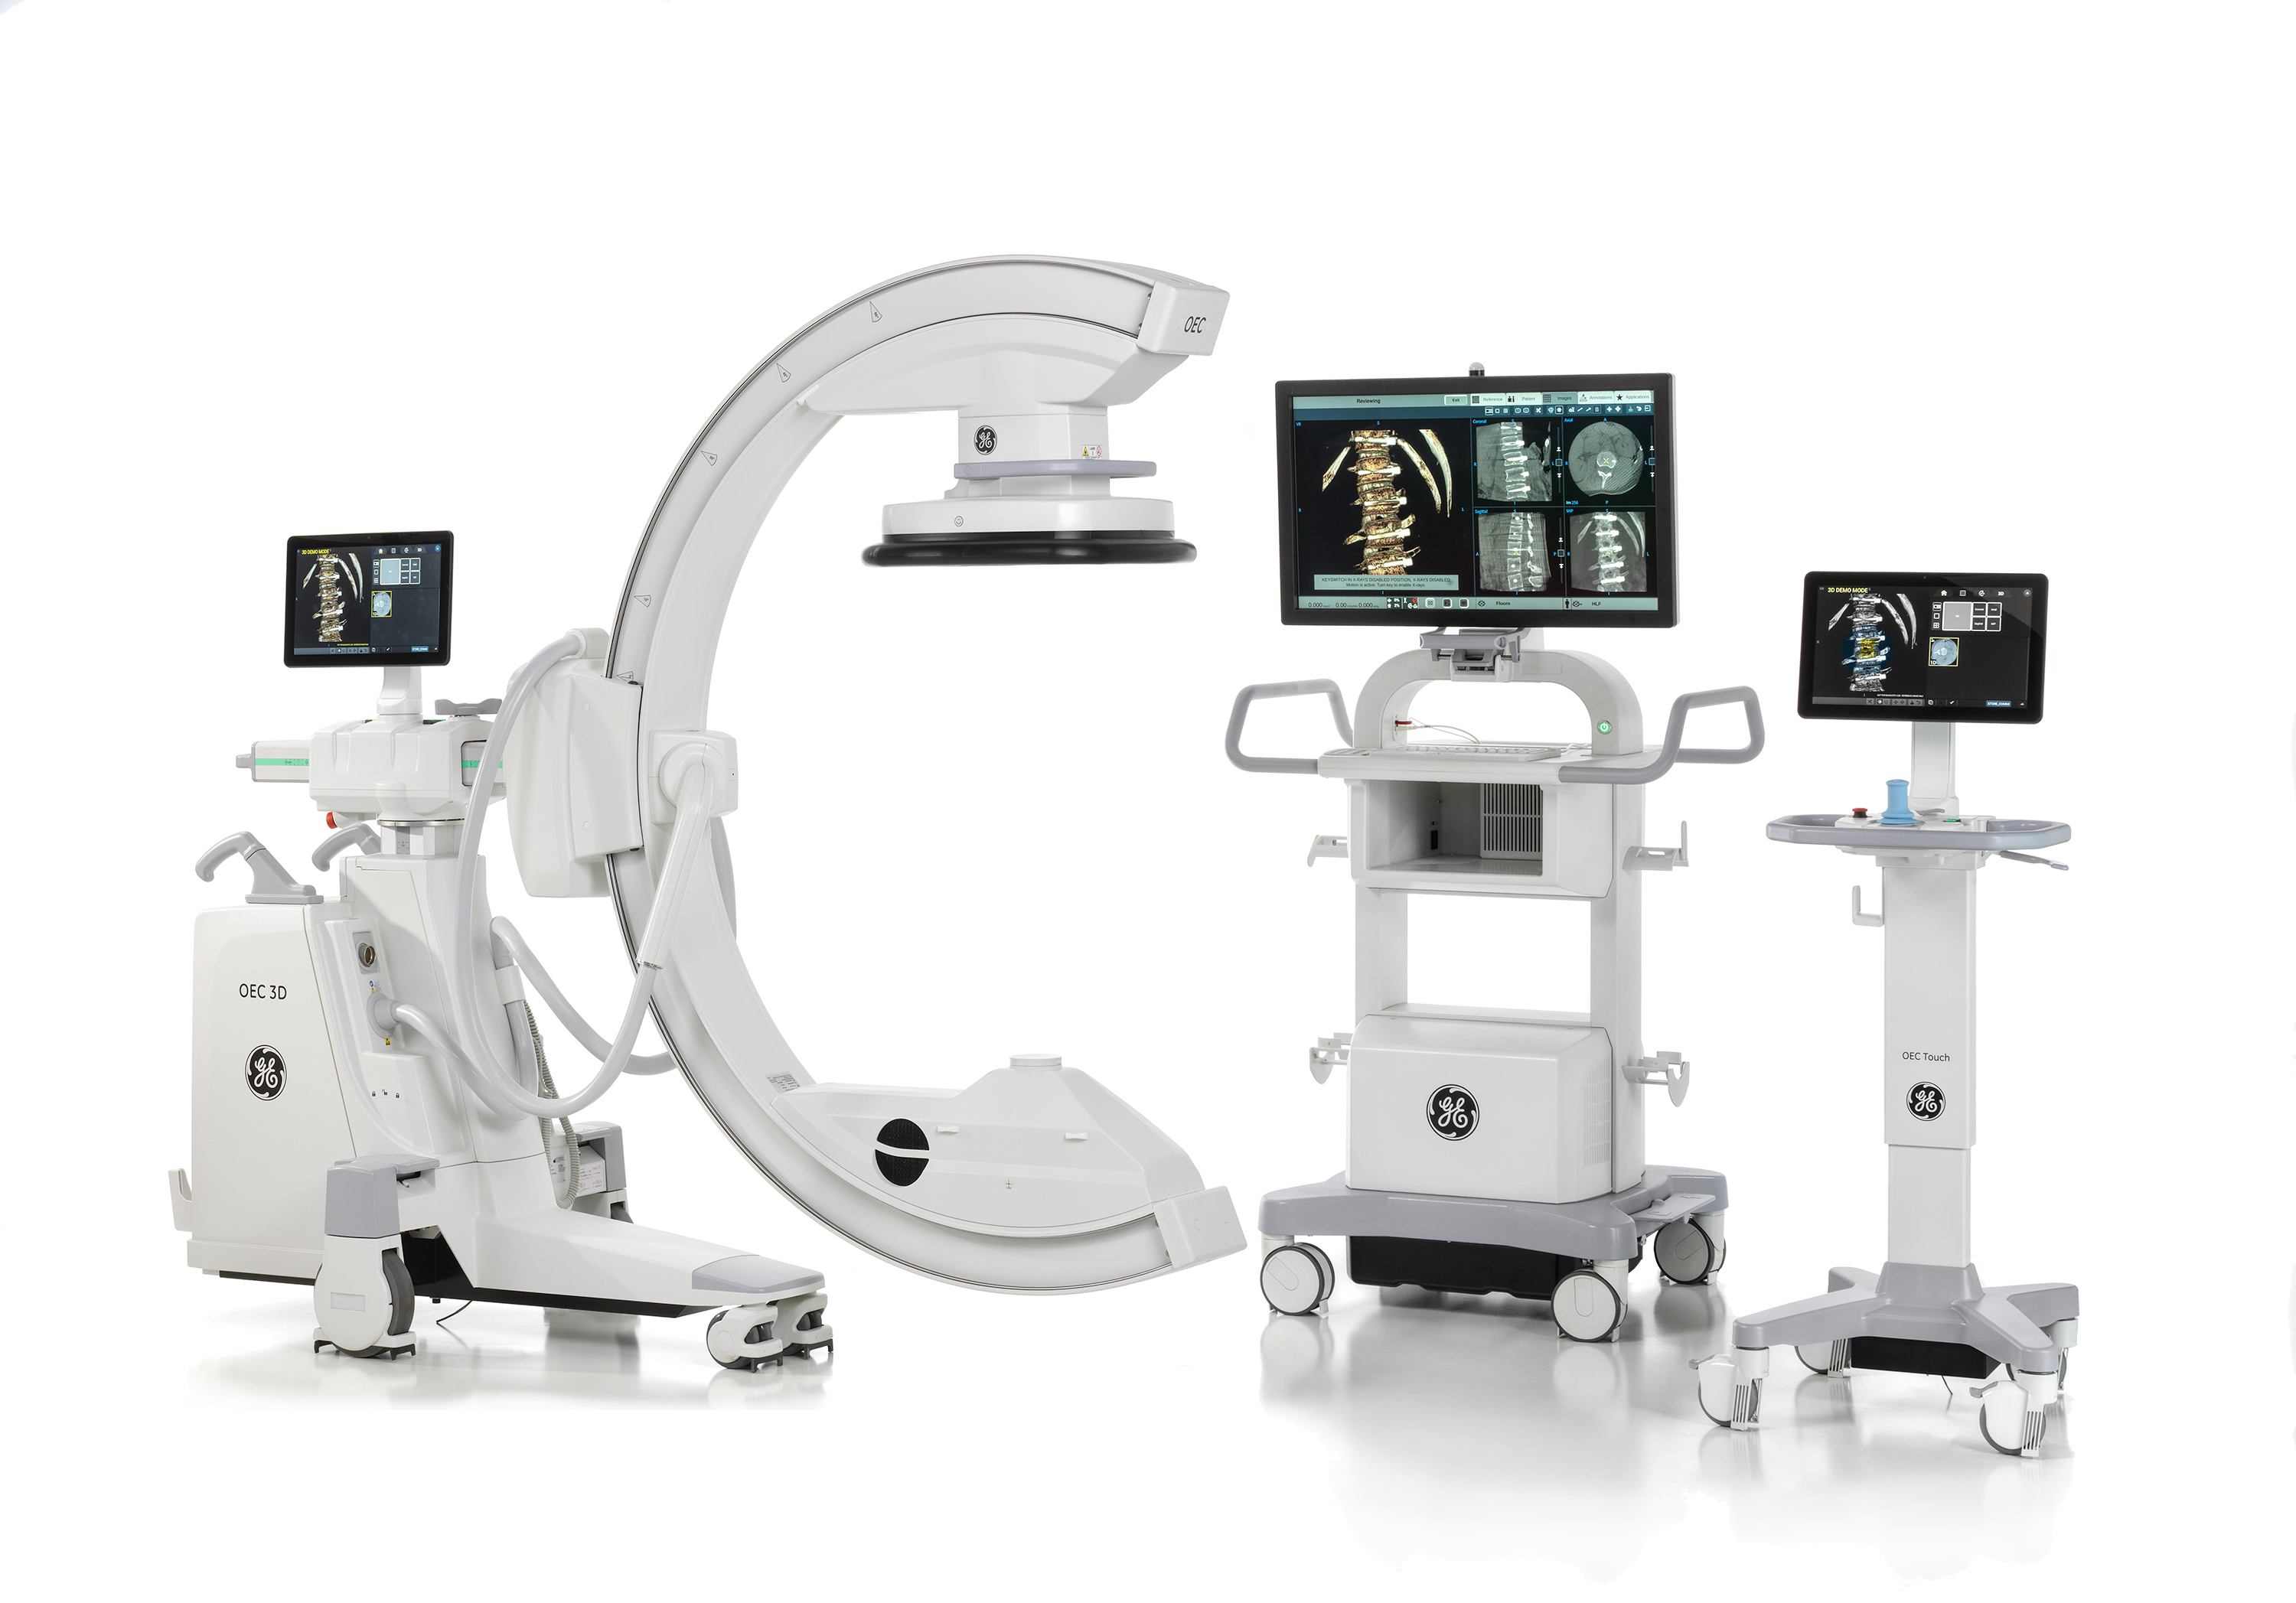 GE OEC 3D C-arm technology allows surgeions to intraoperatively acquire 3D scans of a patient during operations to create a detailed map of surgery and to work with a higher level of accuracy.